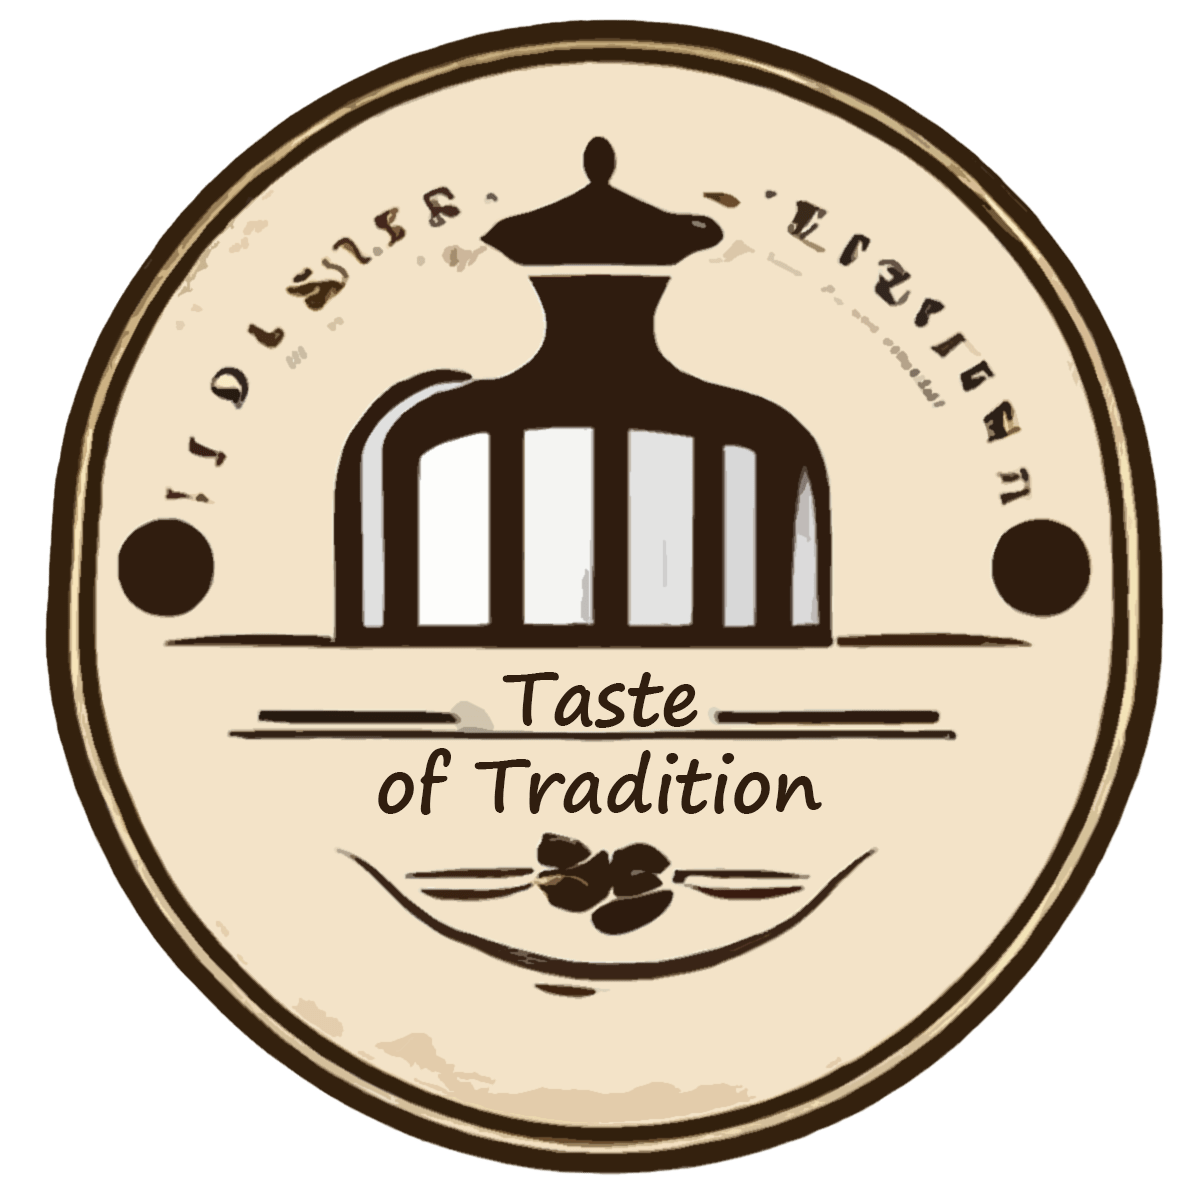 The Taste of Tradition logo